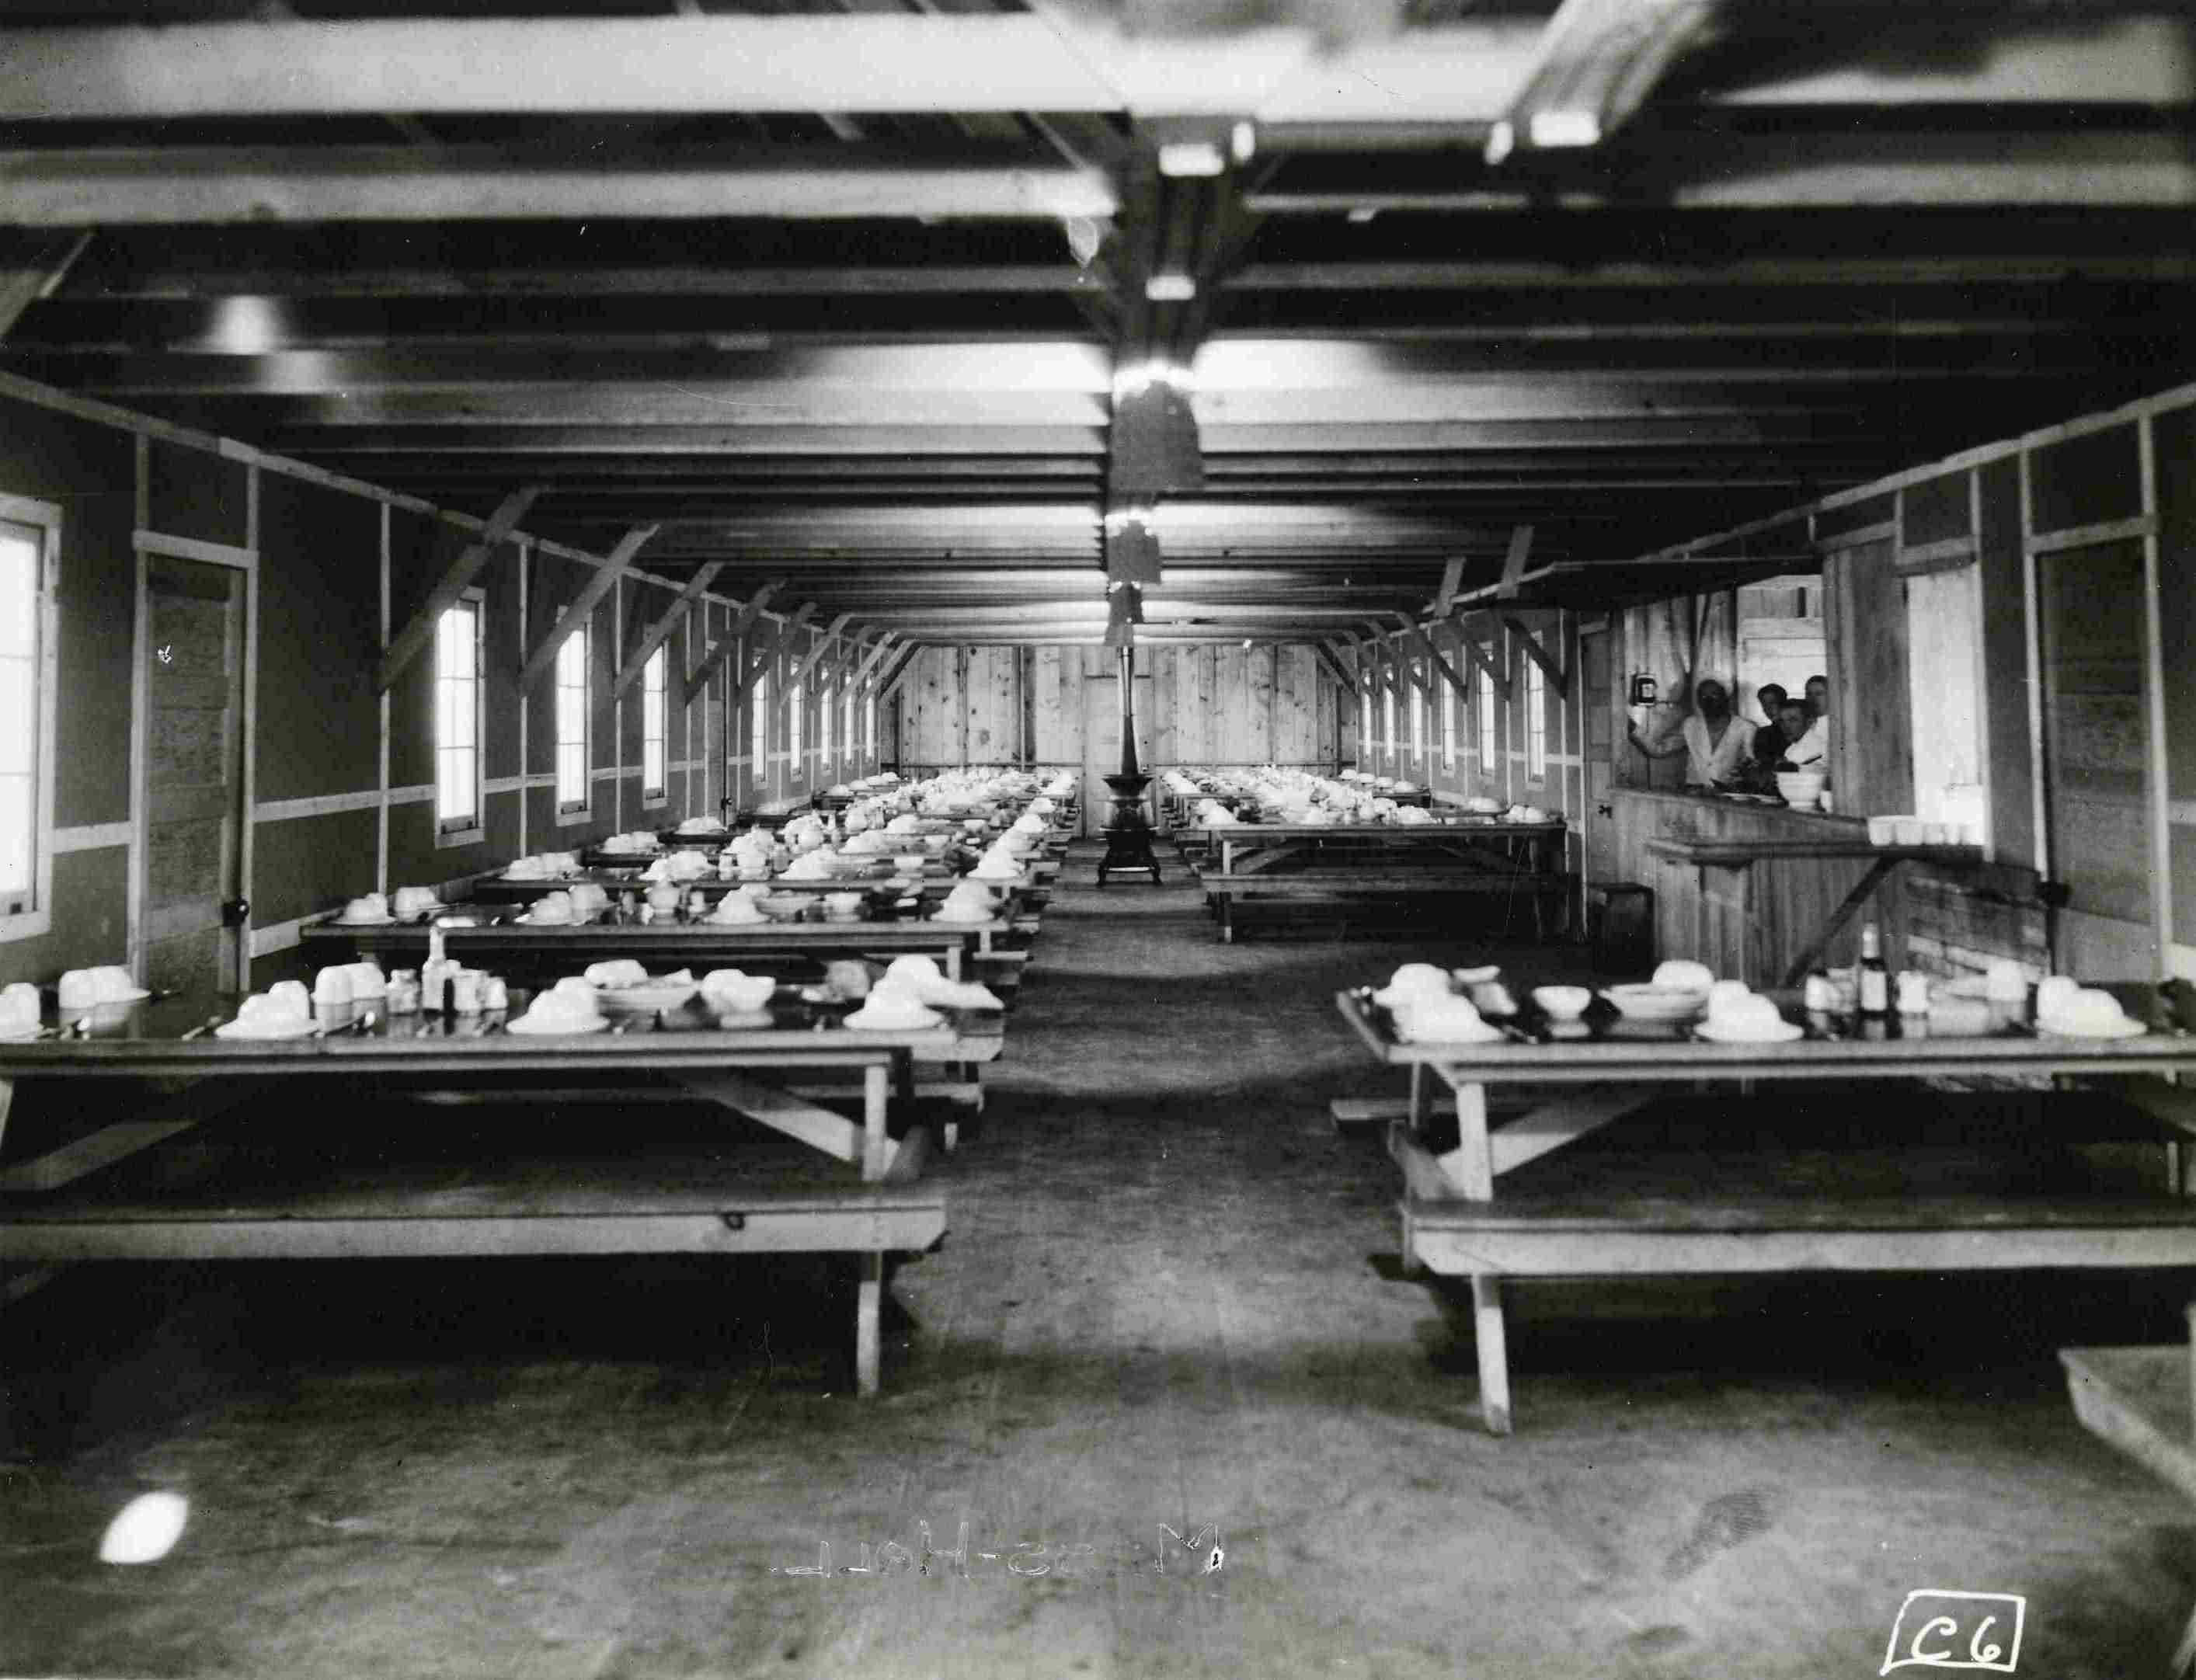 WCHS-01054 Mess hall at one of the CCC camps